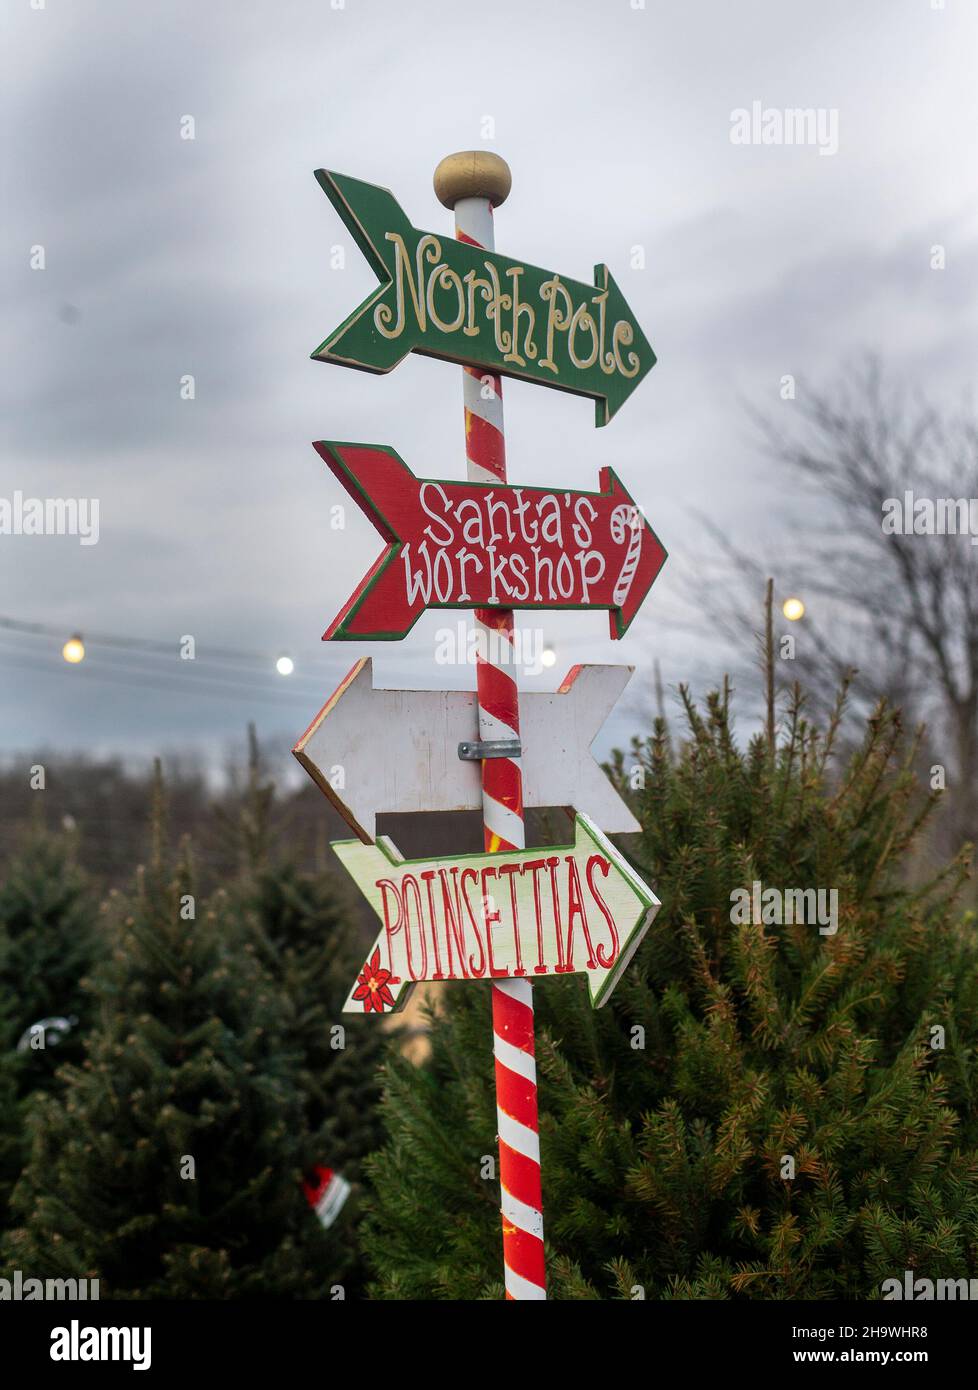 Sign showing directions at a nursery during Christmas Stock Photo